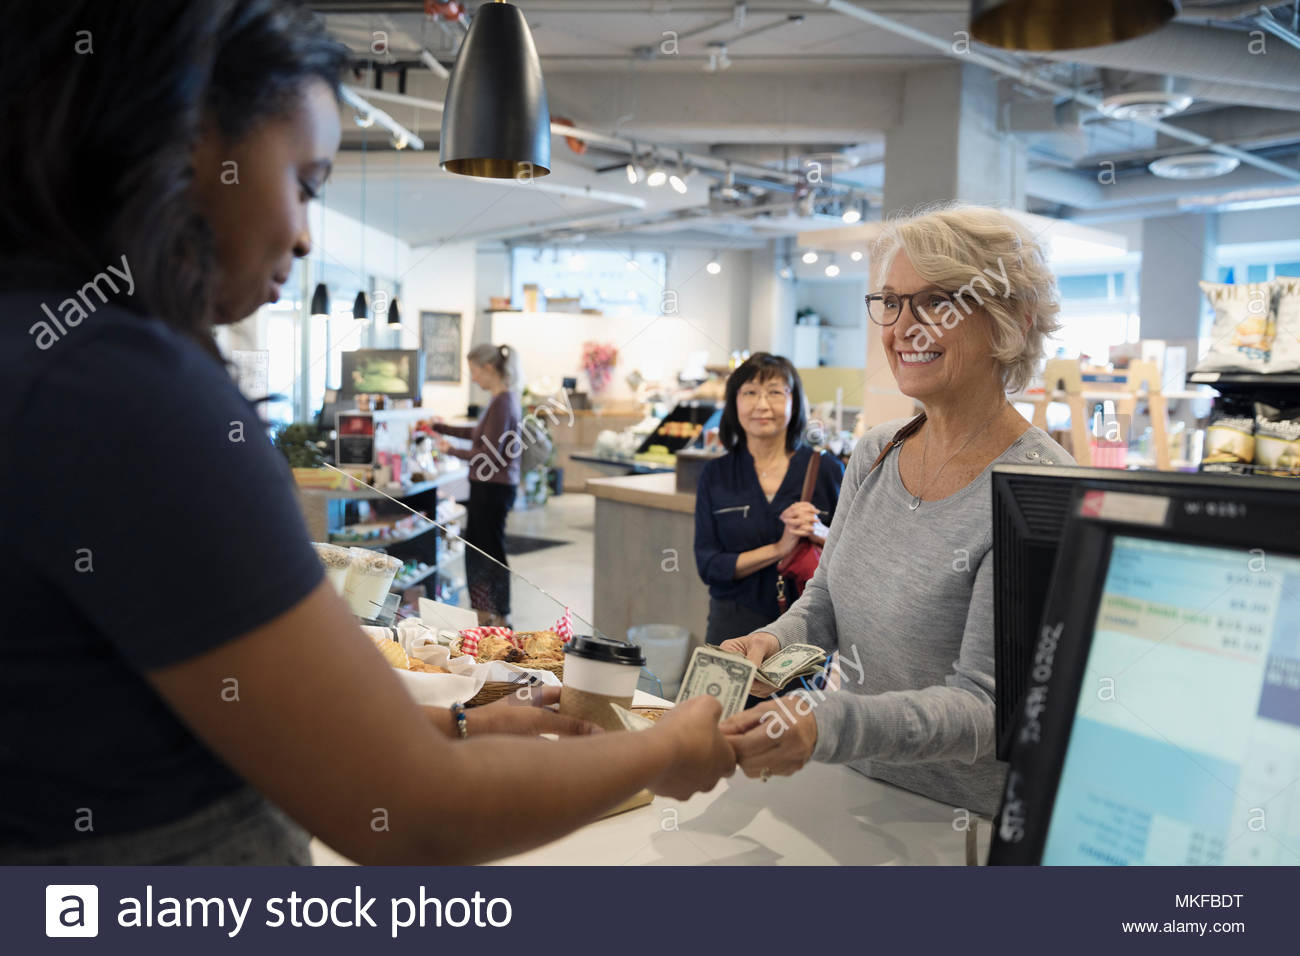 Smiling senior woman paying worker with cash at market checkout Stock Photo